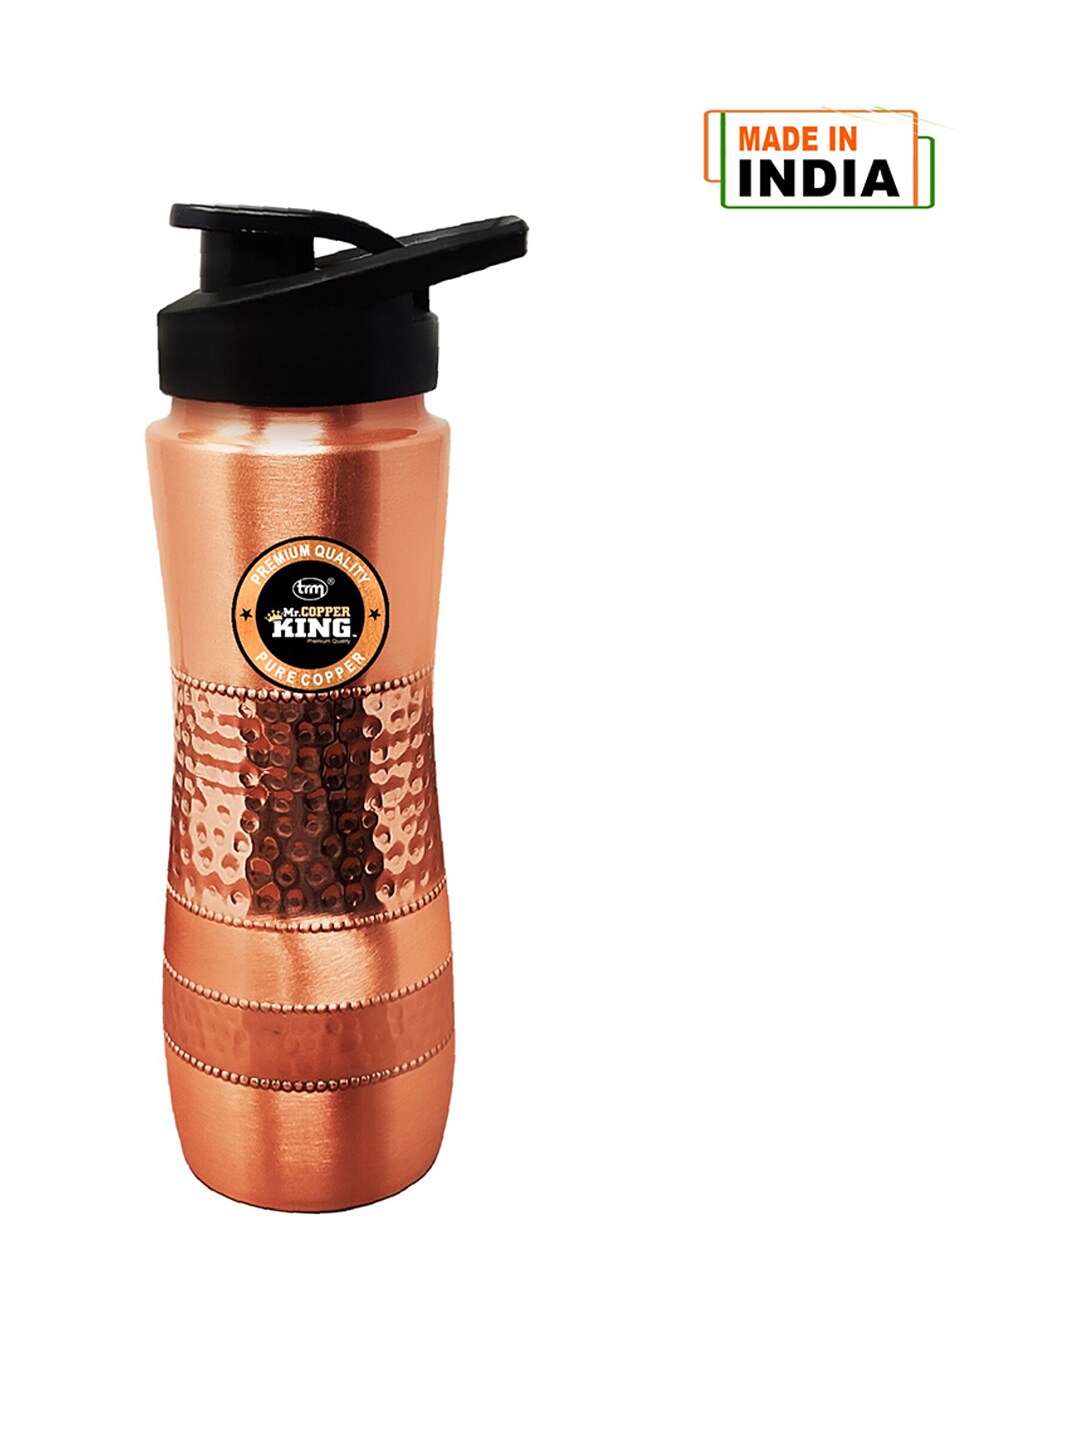 MR. COPPER KING Copper-Toned Textured Sipper Bottle 800ml Price in India